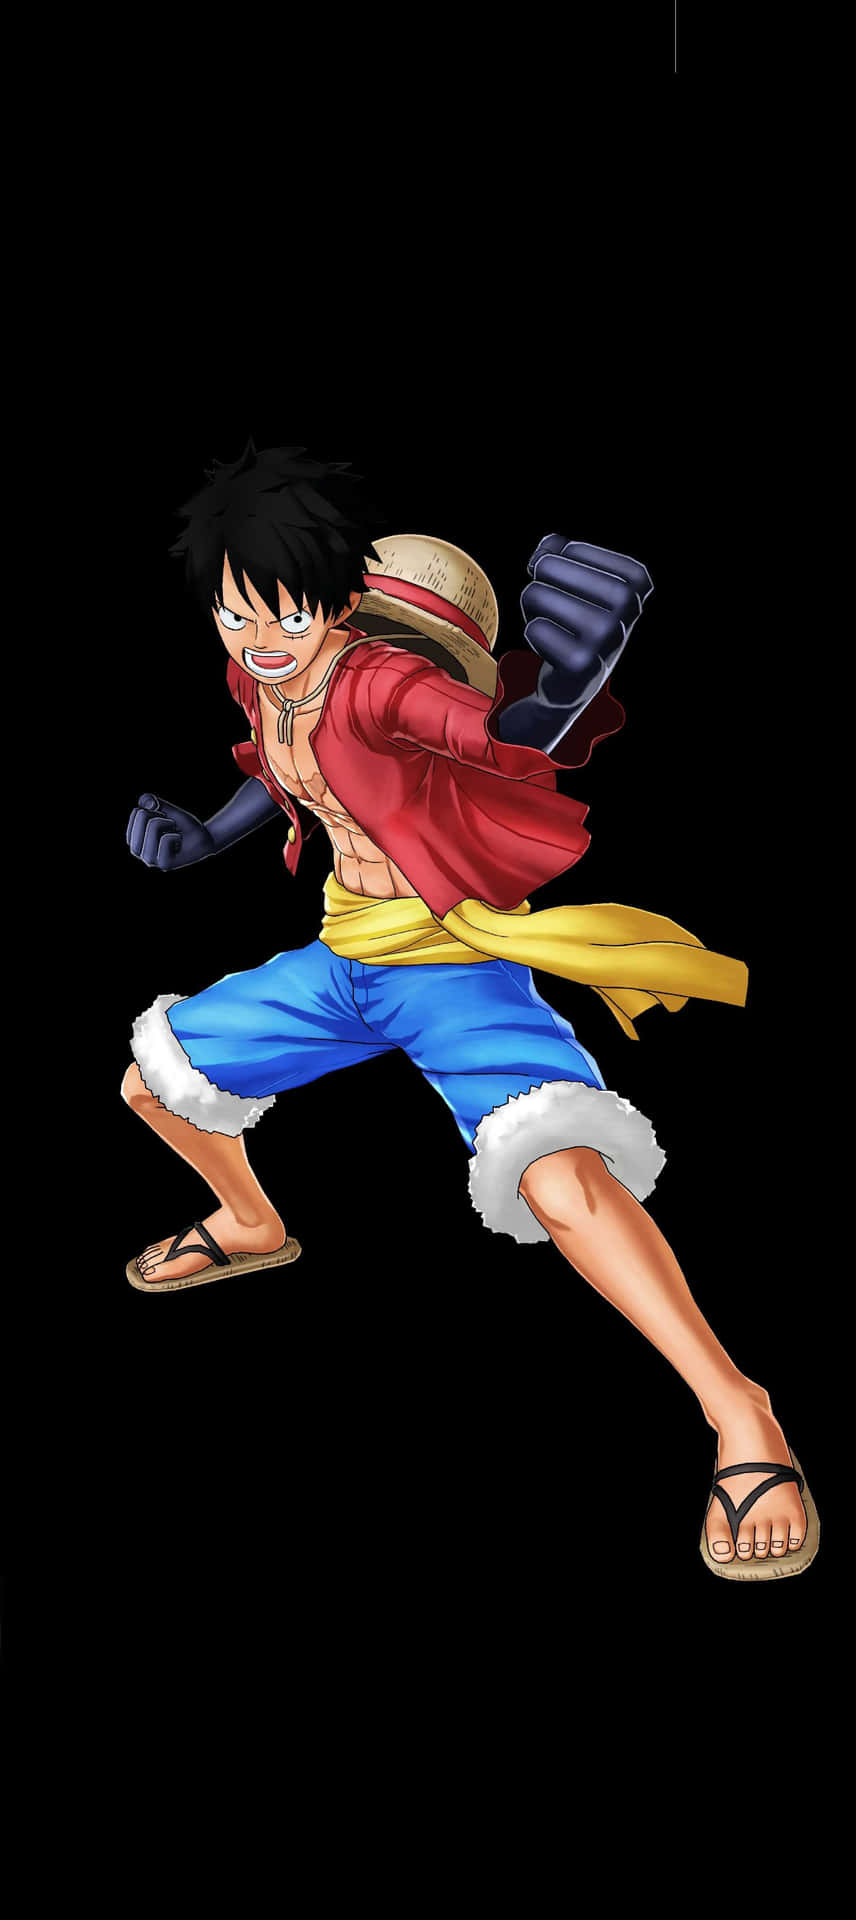 Luffy One Piece Anime Character Wallpaper